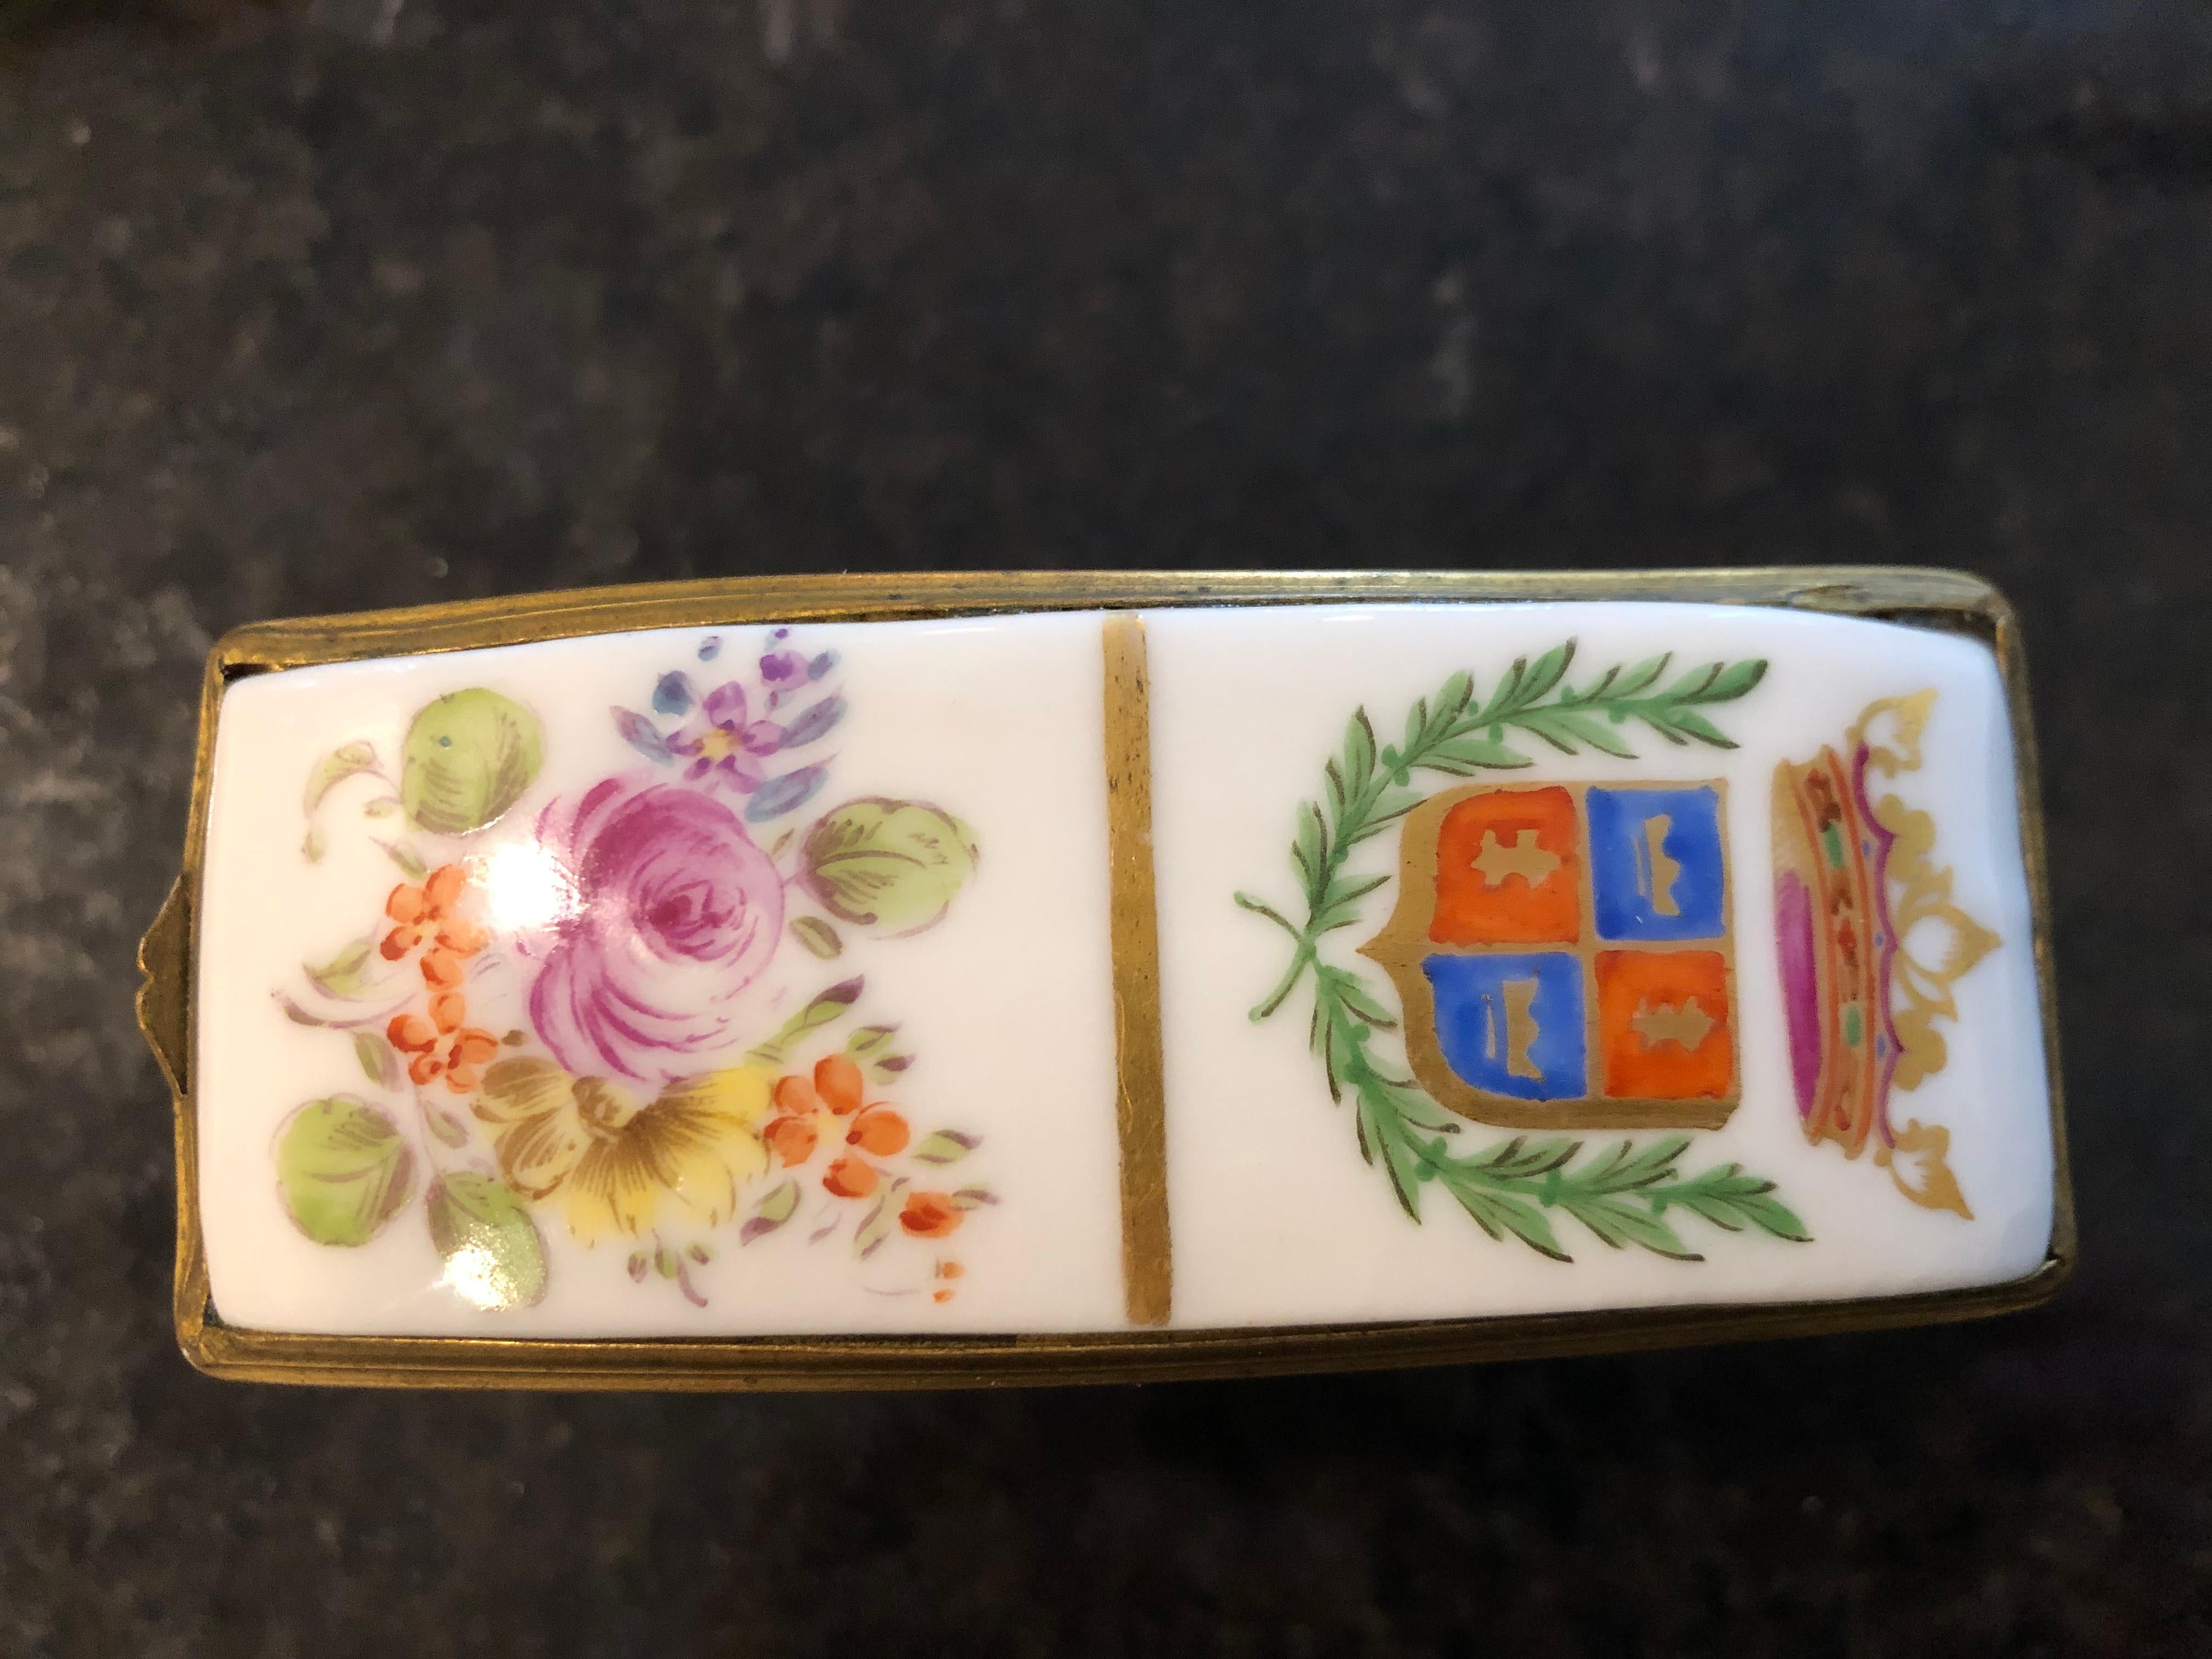 Pretty little snuff box with hand painted flower and armorial decor, made by Samson, Paris, circa 1950. The snuff box is made in the style of the German porcelain manufacturer Meissen. Edme Samson’s porcelain manufacturing company was established